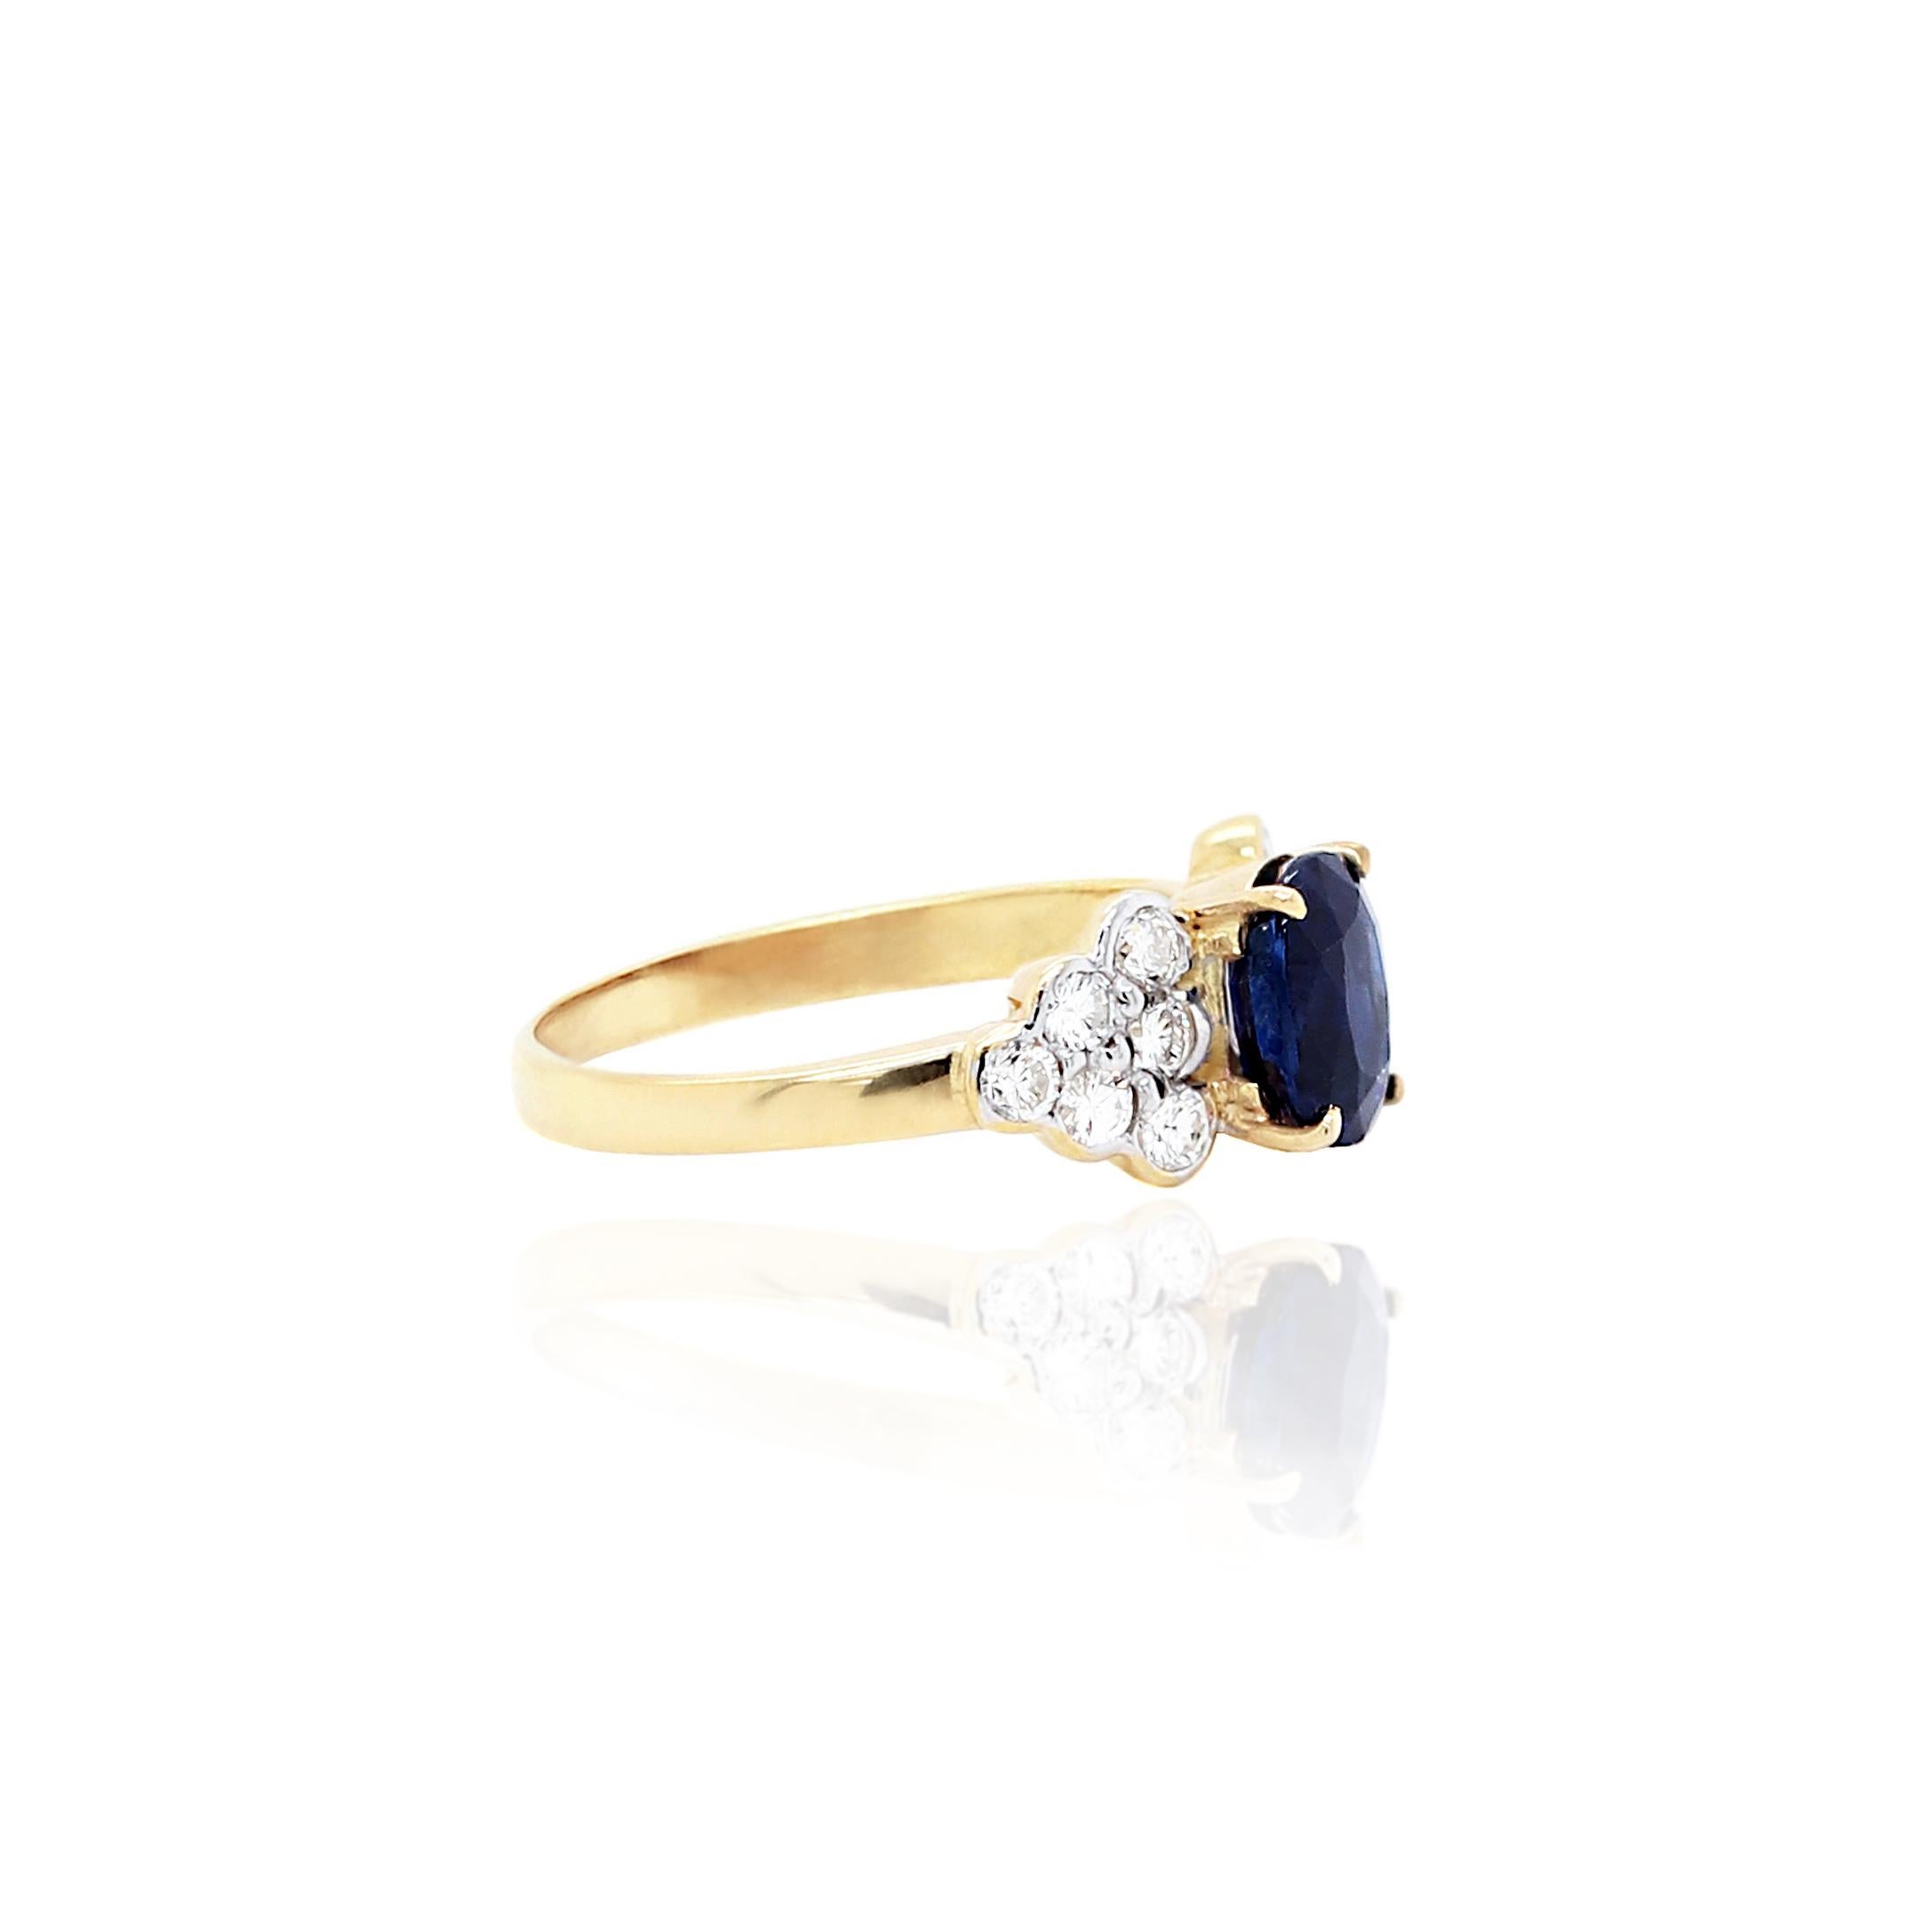 This beautiful engagement ring features a royal blue oval sapphire weighing 1.56ct mounted in a four claw open back setting. This lovely stone is accompanied by a cluster of six fine quality round brilliant cut diamonds on either side, totalling to